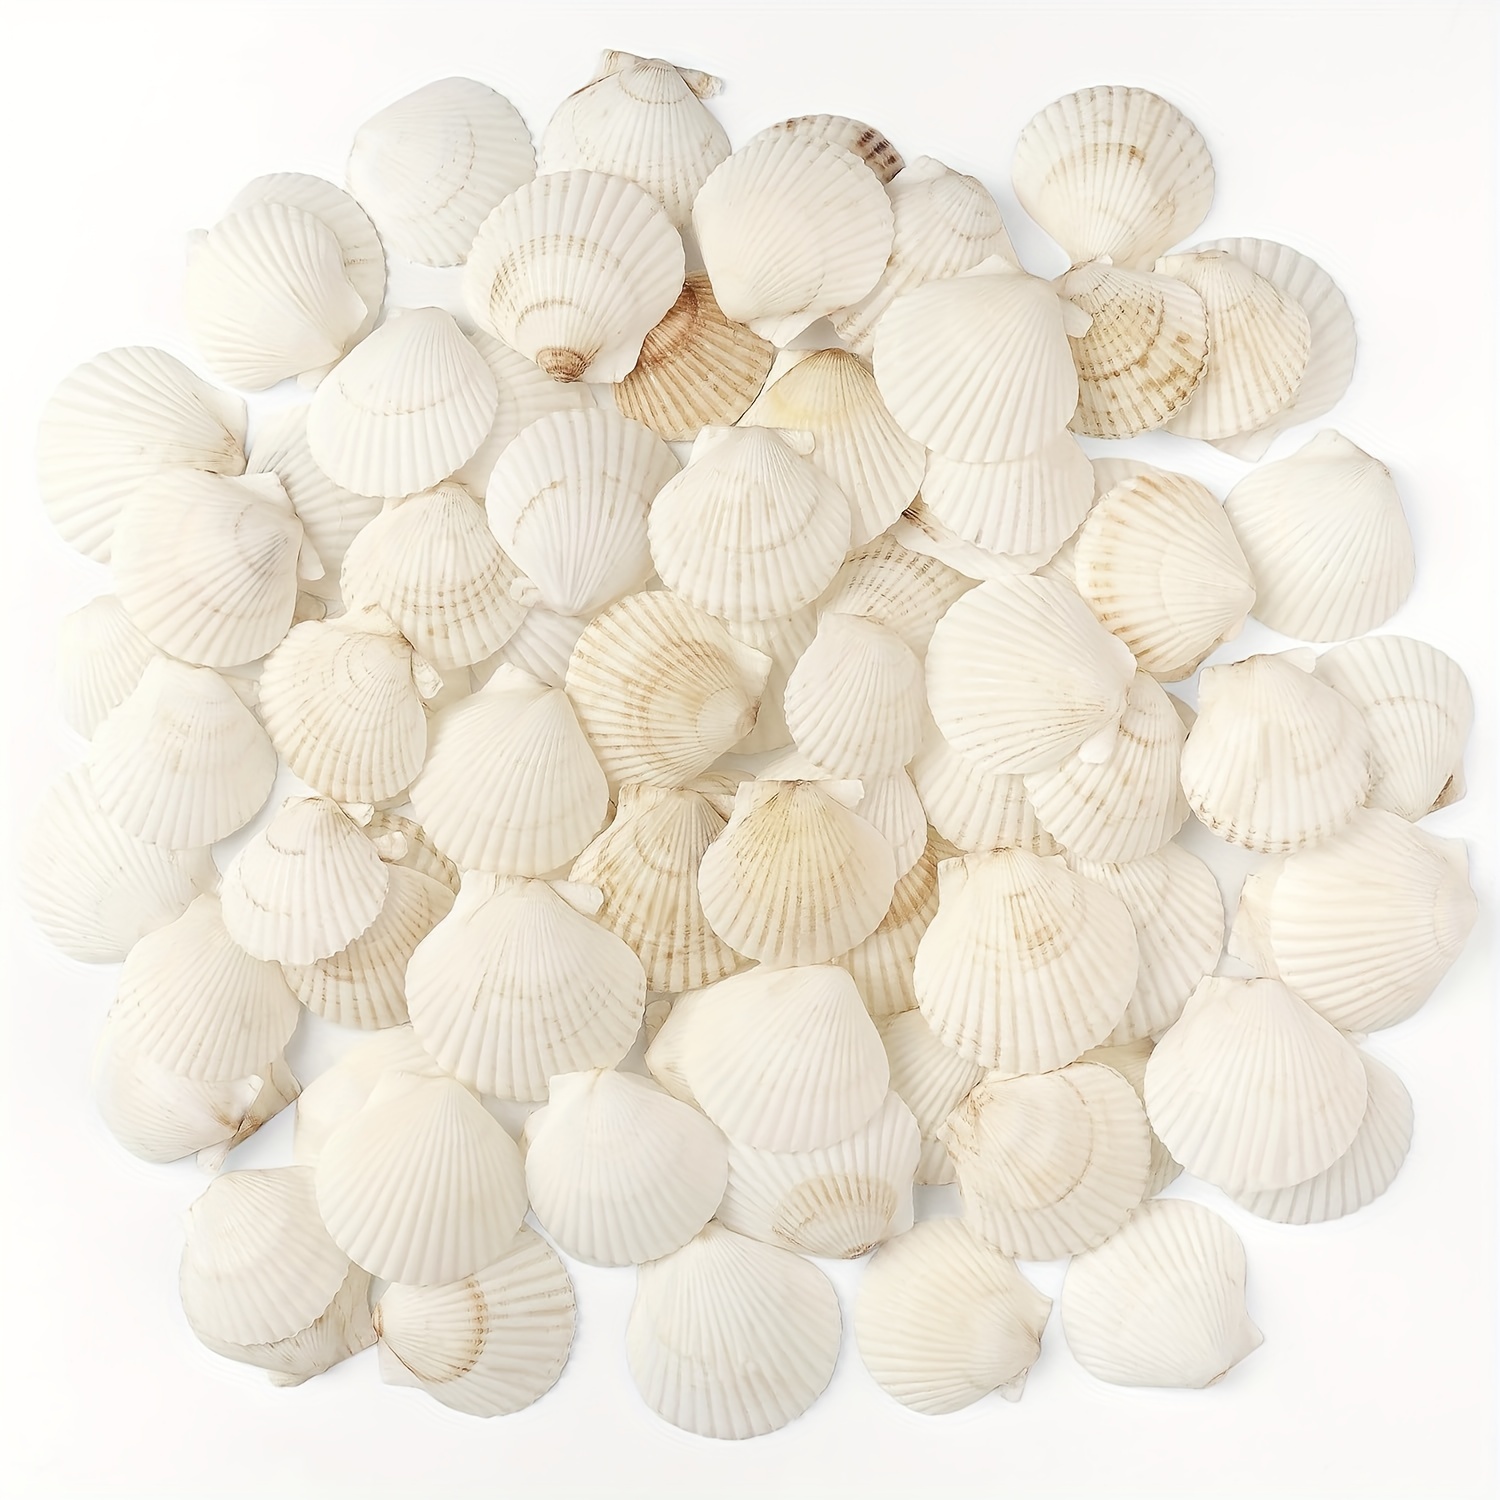 

48pcs, Scallop Shells Natural Seashell, 1.5" To 2" White Scallop Shells Small Seashells For Crafts Wedding Decor Beach Theme Party, Fish Tank And Vase Filler